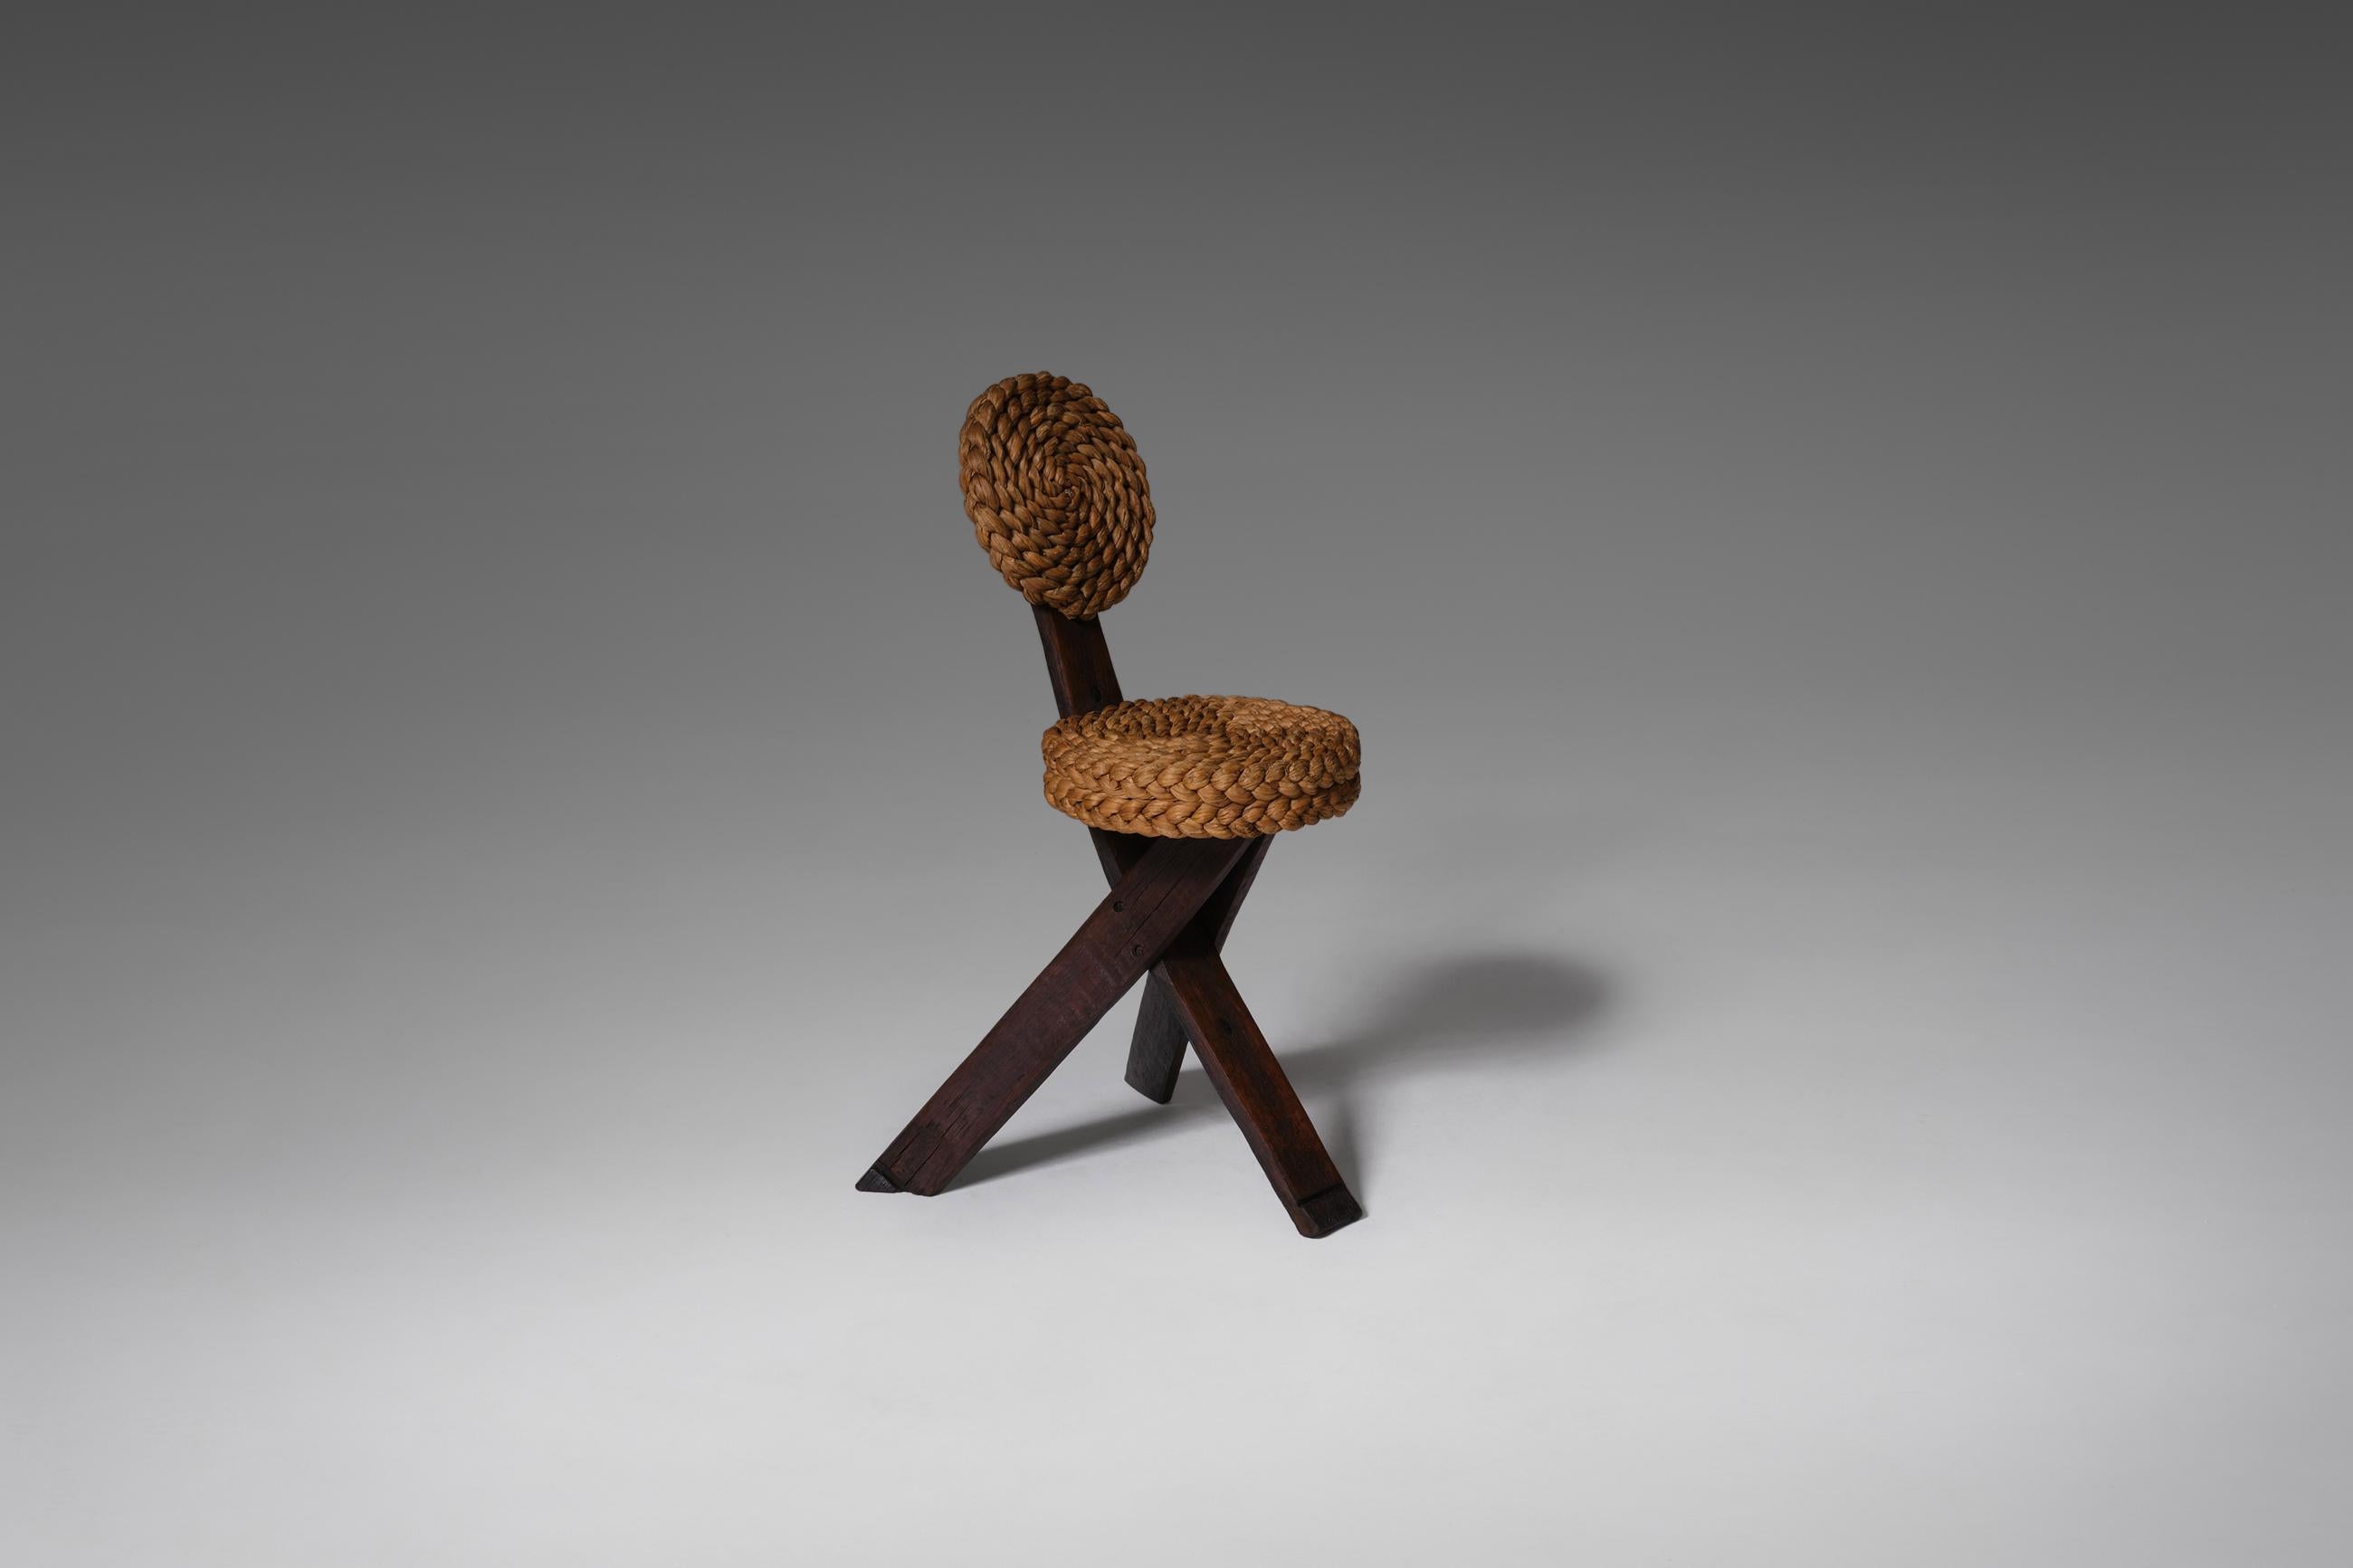 Wood and Rush side chair by Adrien Audoux and Frida Minet, France, 1960’s. The chair has a nice robust stained bent wooden frame and an elegant round rush seat and backrest. Very nice decorative object in original condition with a beautiful patina.